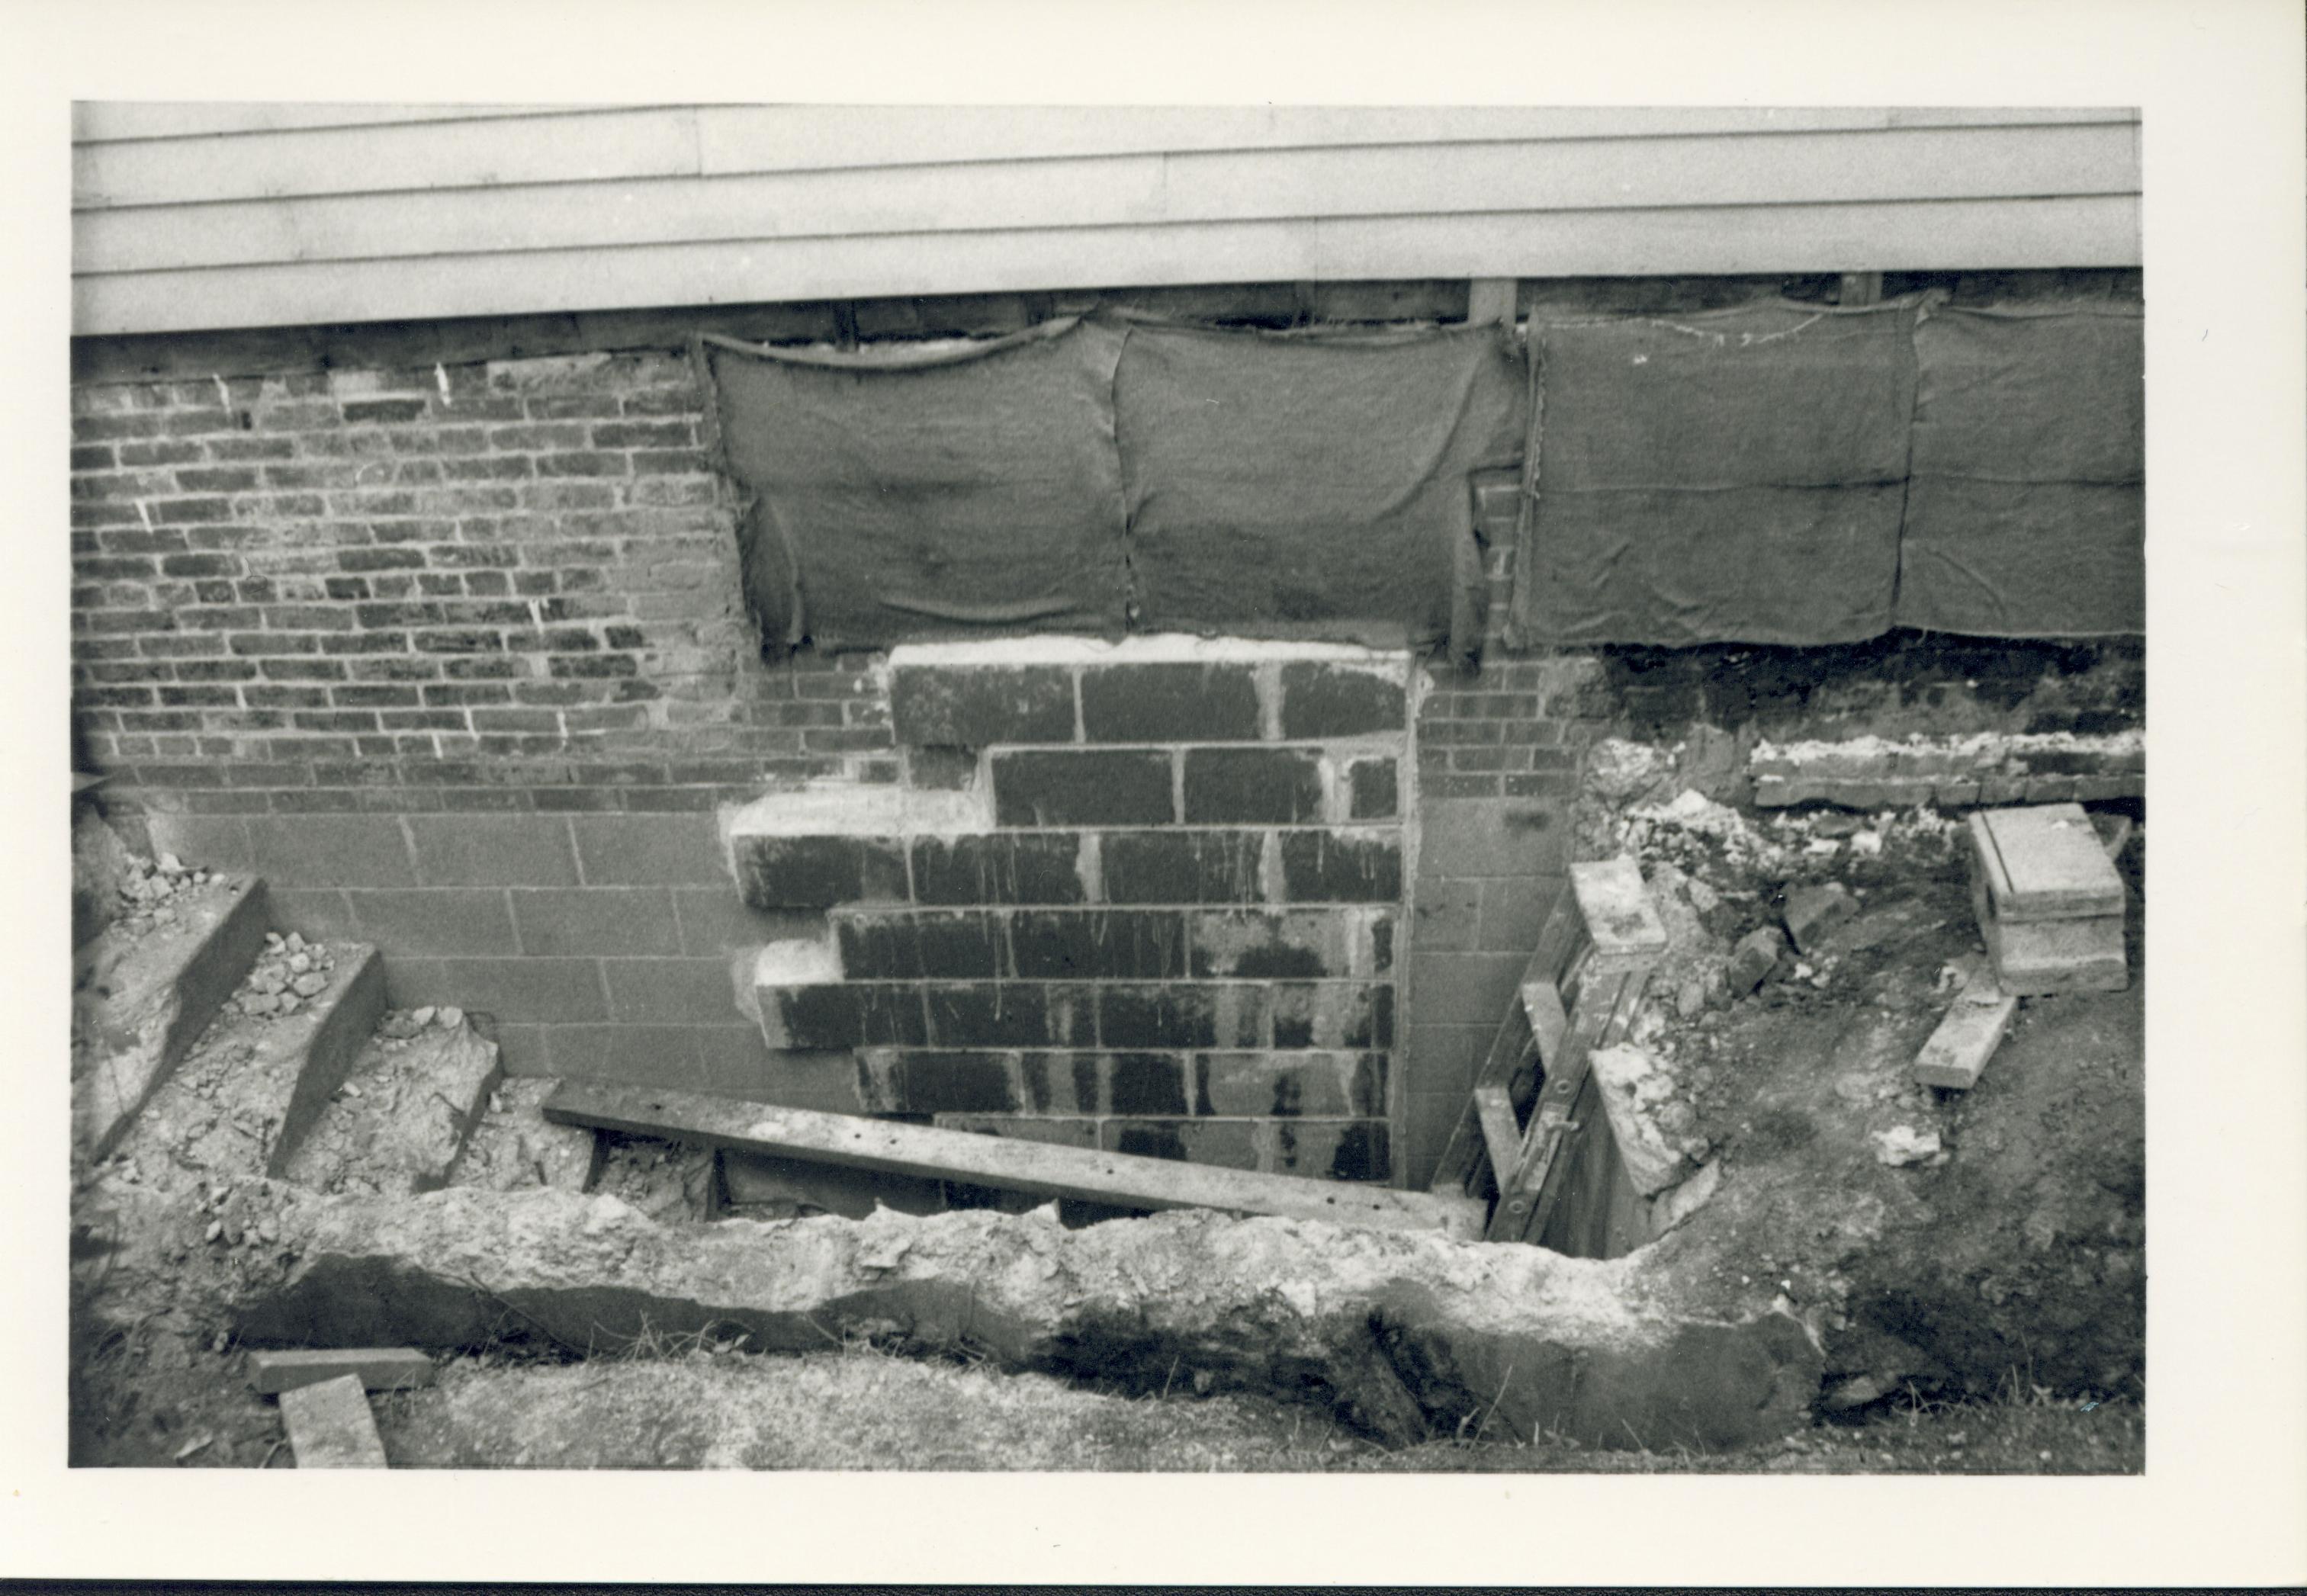 Demolition of the non-historic basement-level north entrance to the Lincoln Home mechanical room/basement. The former doorway is filled with cinderblock, while the stairs and retaining wall are in the process of demolition. Photographer facing south.